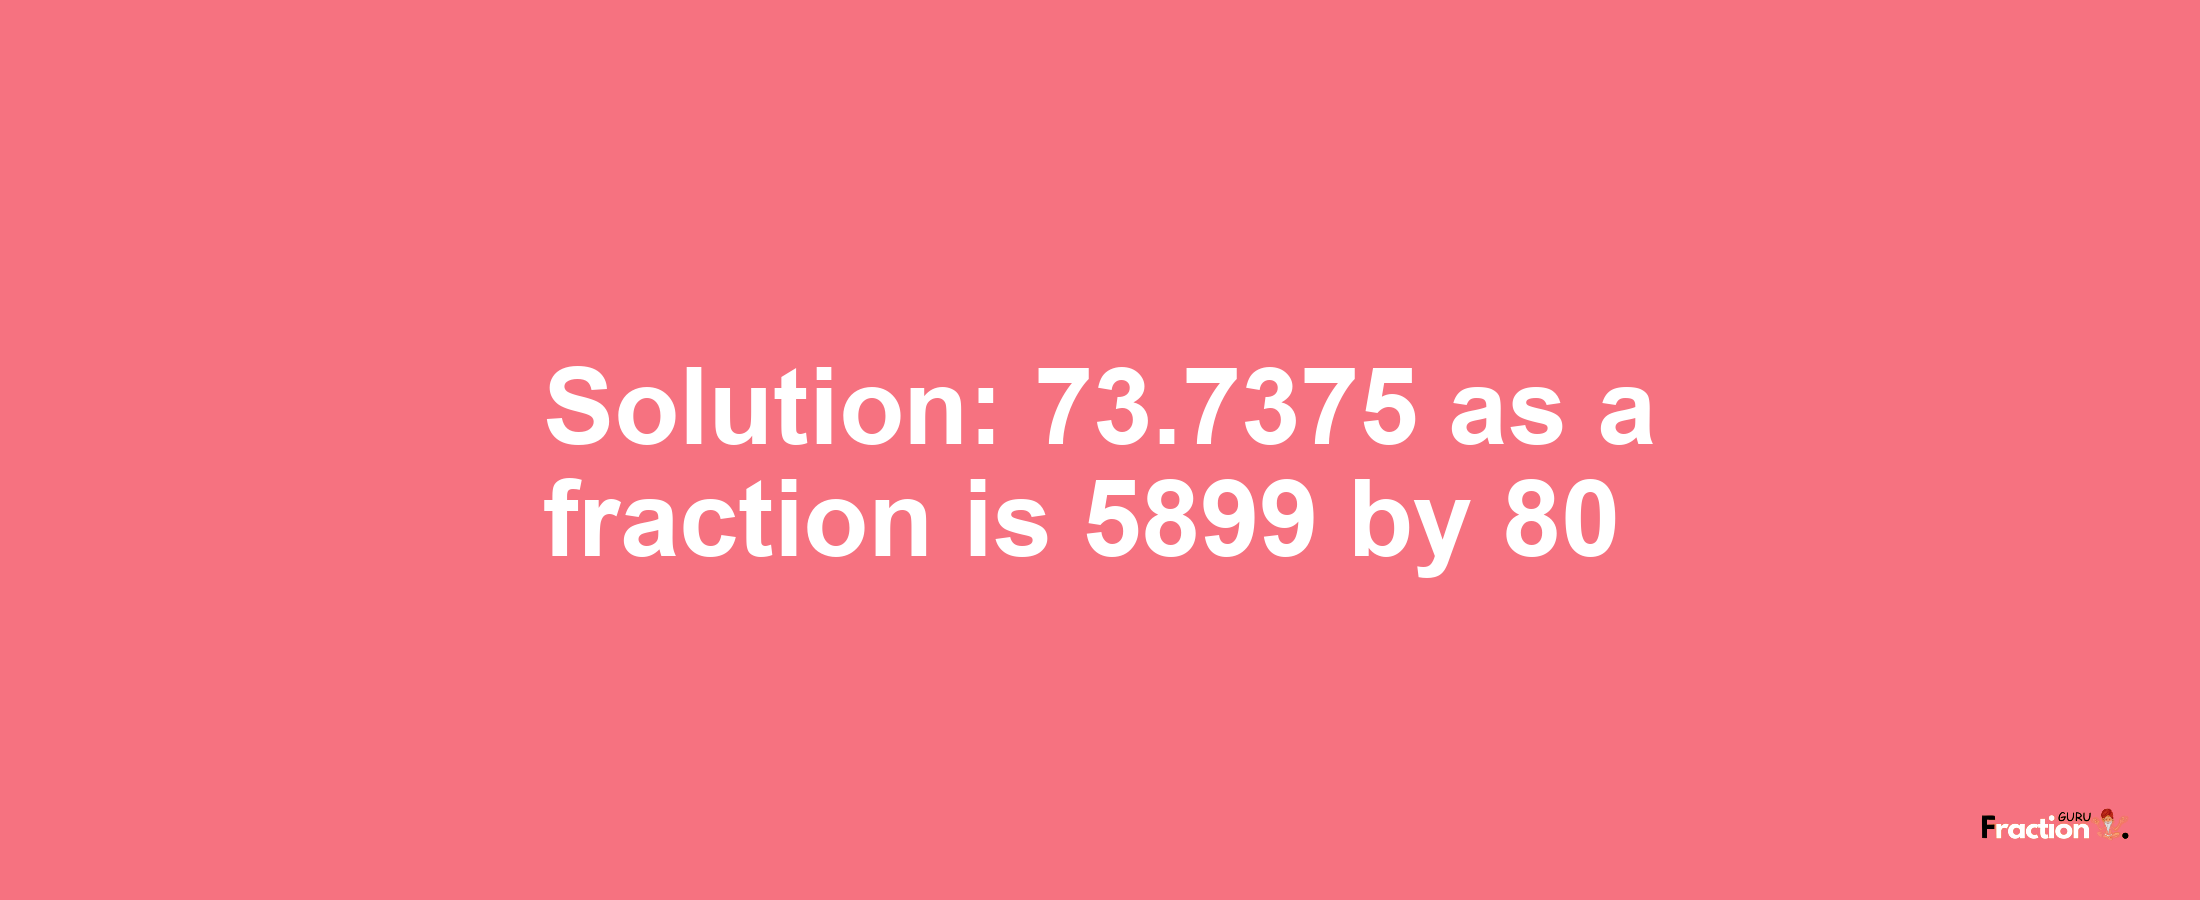 Solution:73.7375 as a fraction is 5899/80